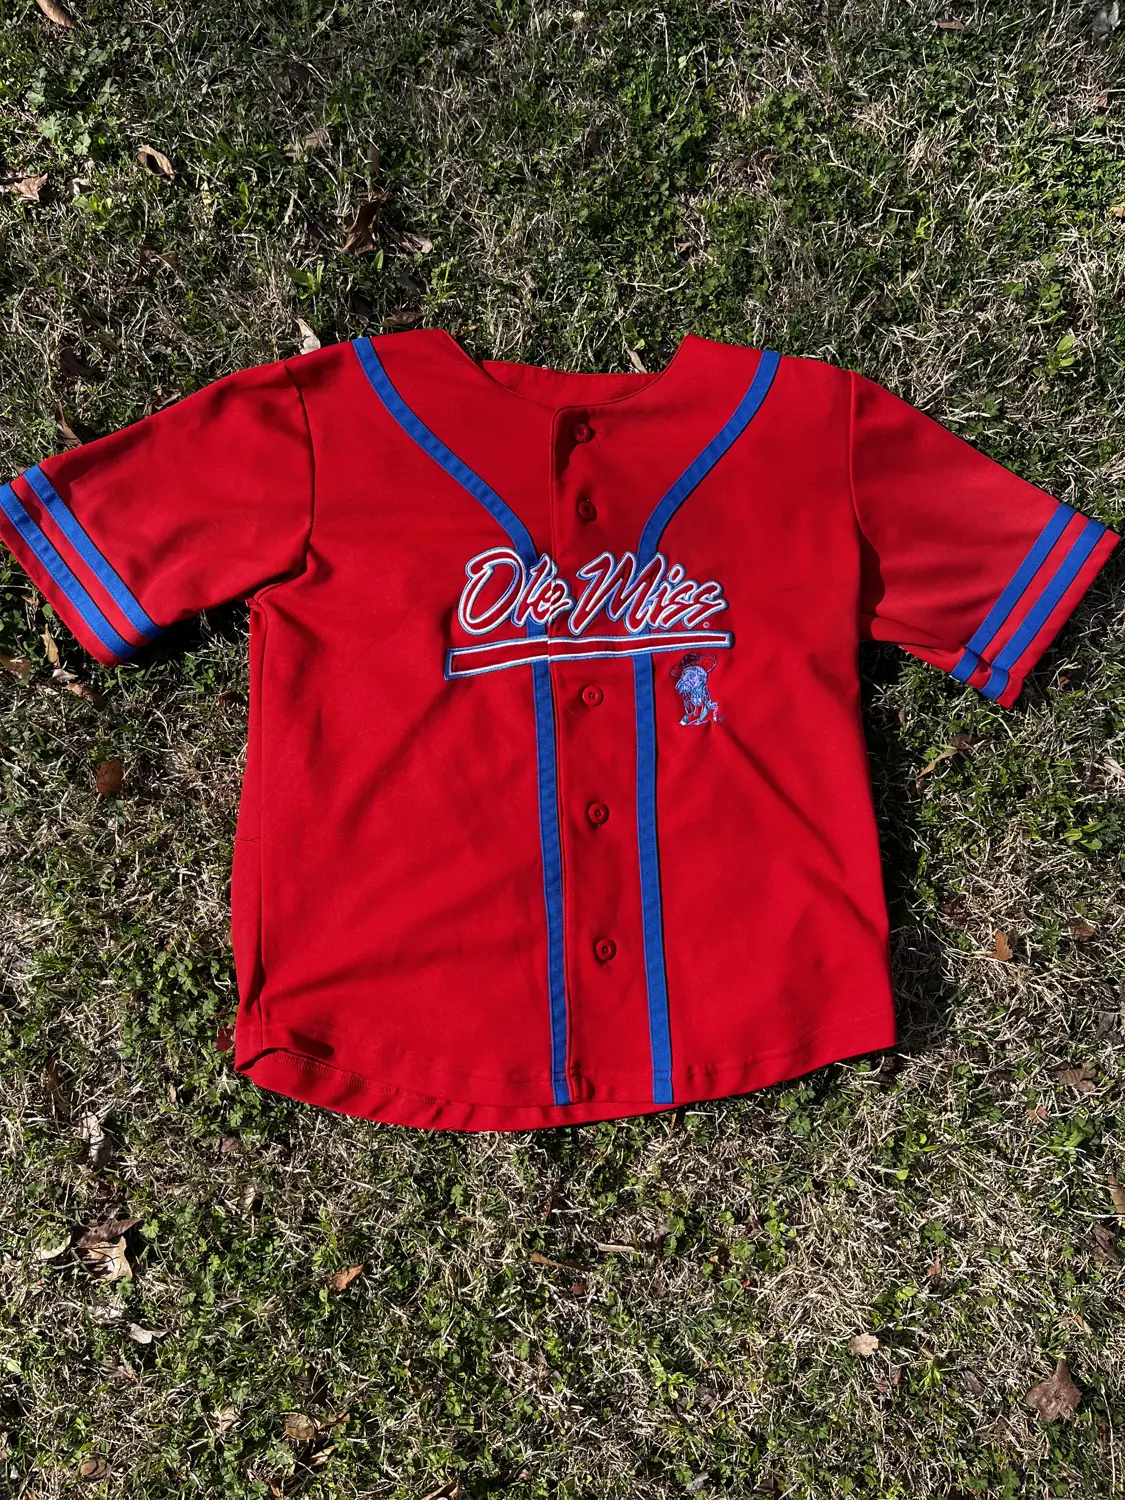 Starter Colonel Reb Jersey